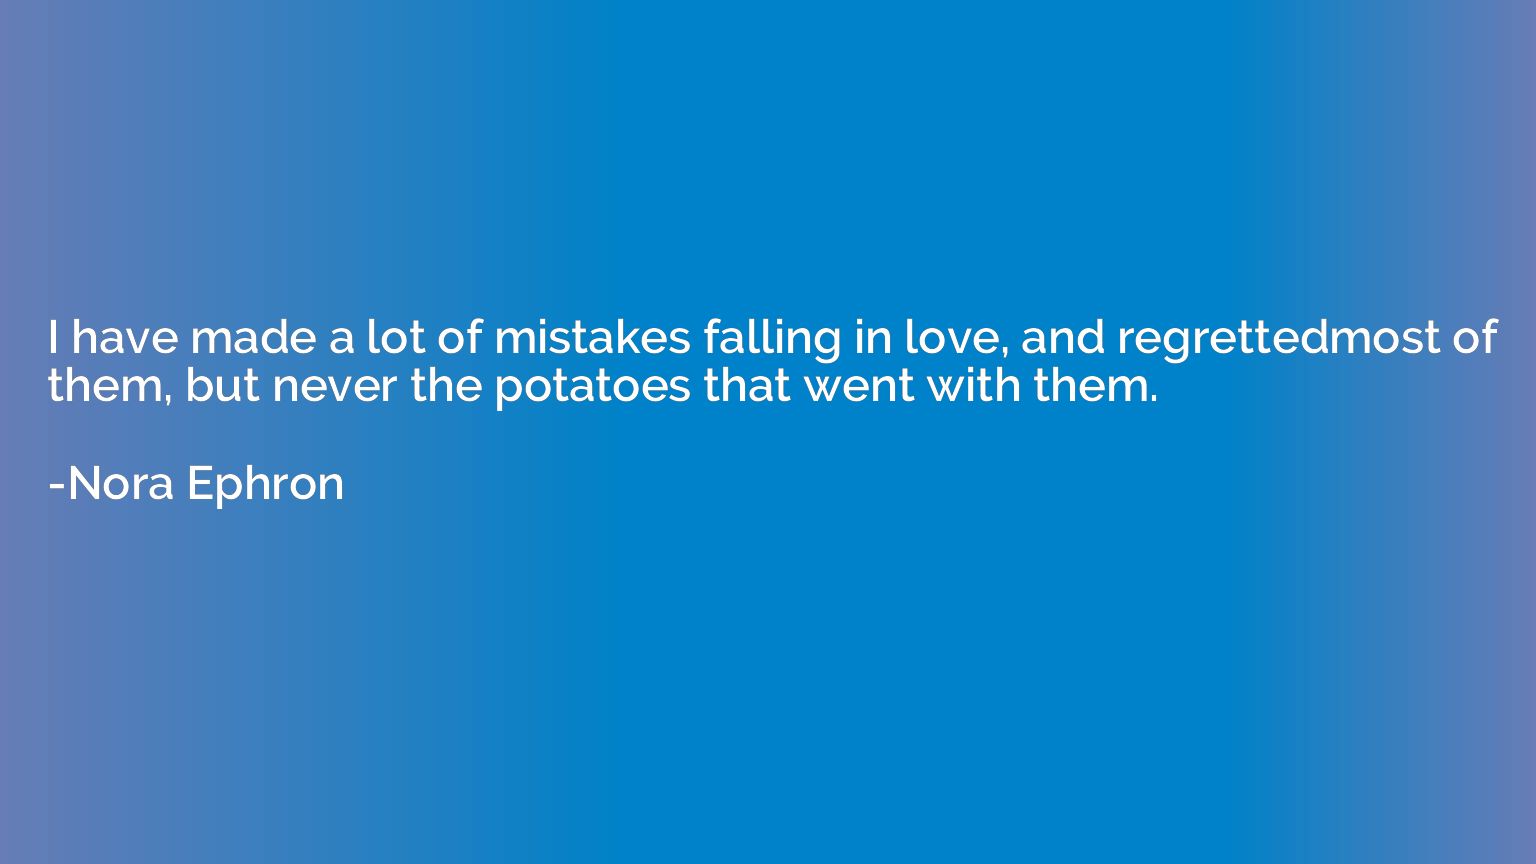 I have made a lot of mistakes falling in love, and regretted